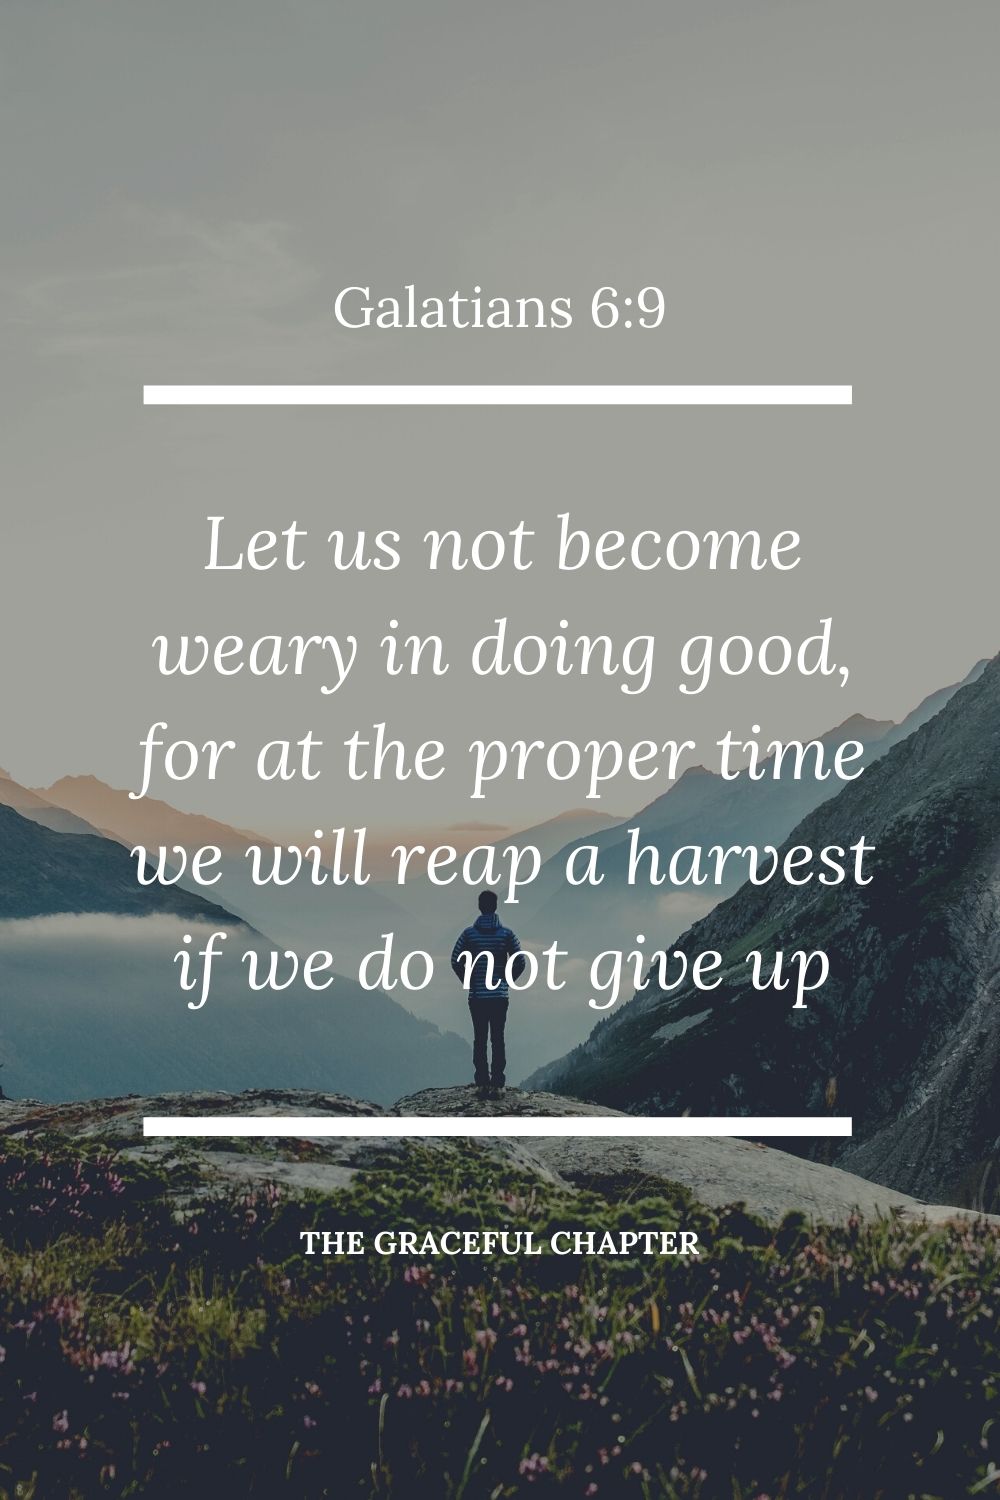 Let us not become weary in doing good, for at the proper time we will reap a harvest if we do not give up.  Galatians 6:9